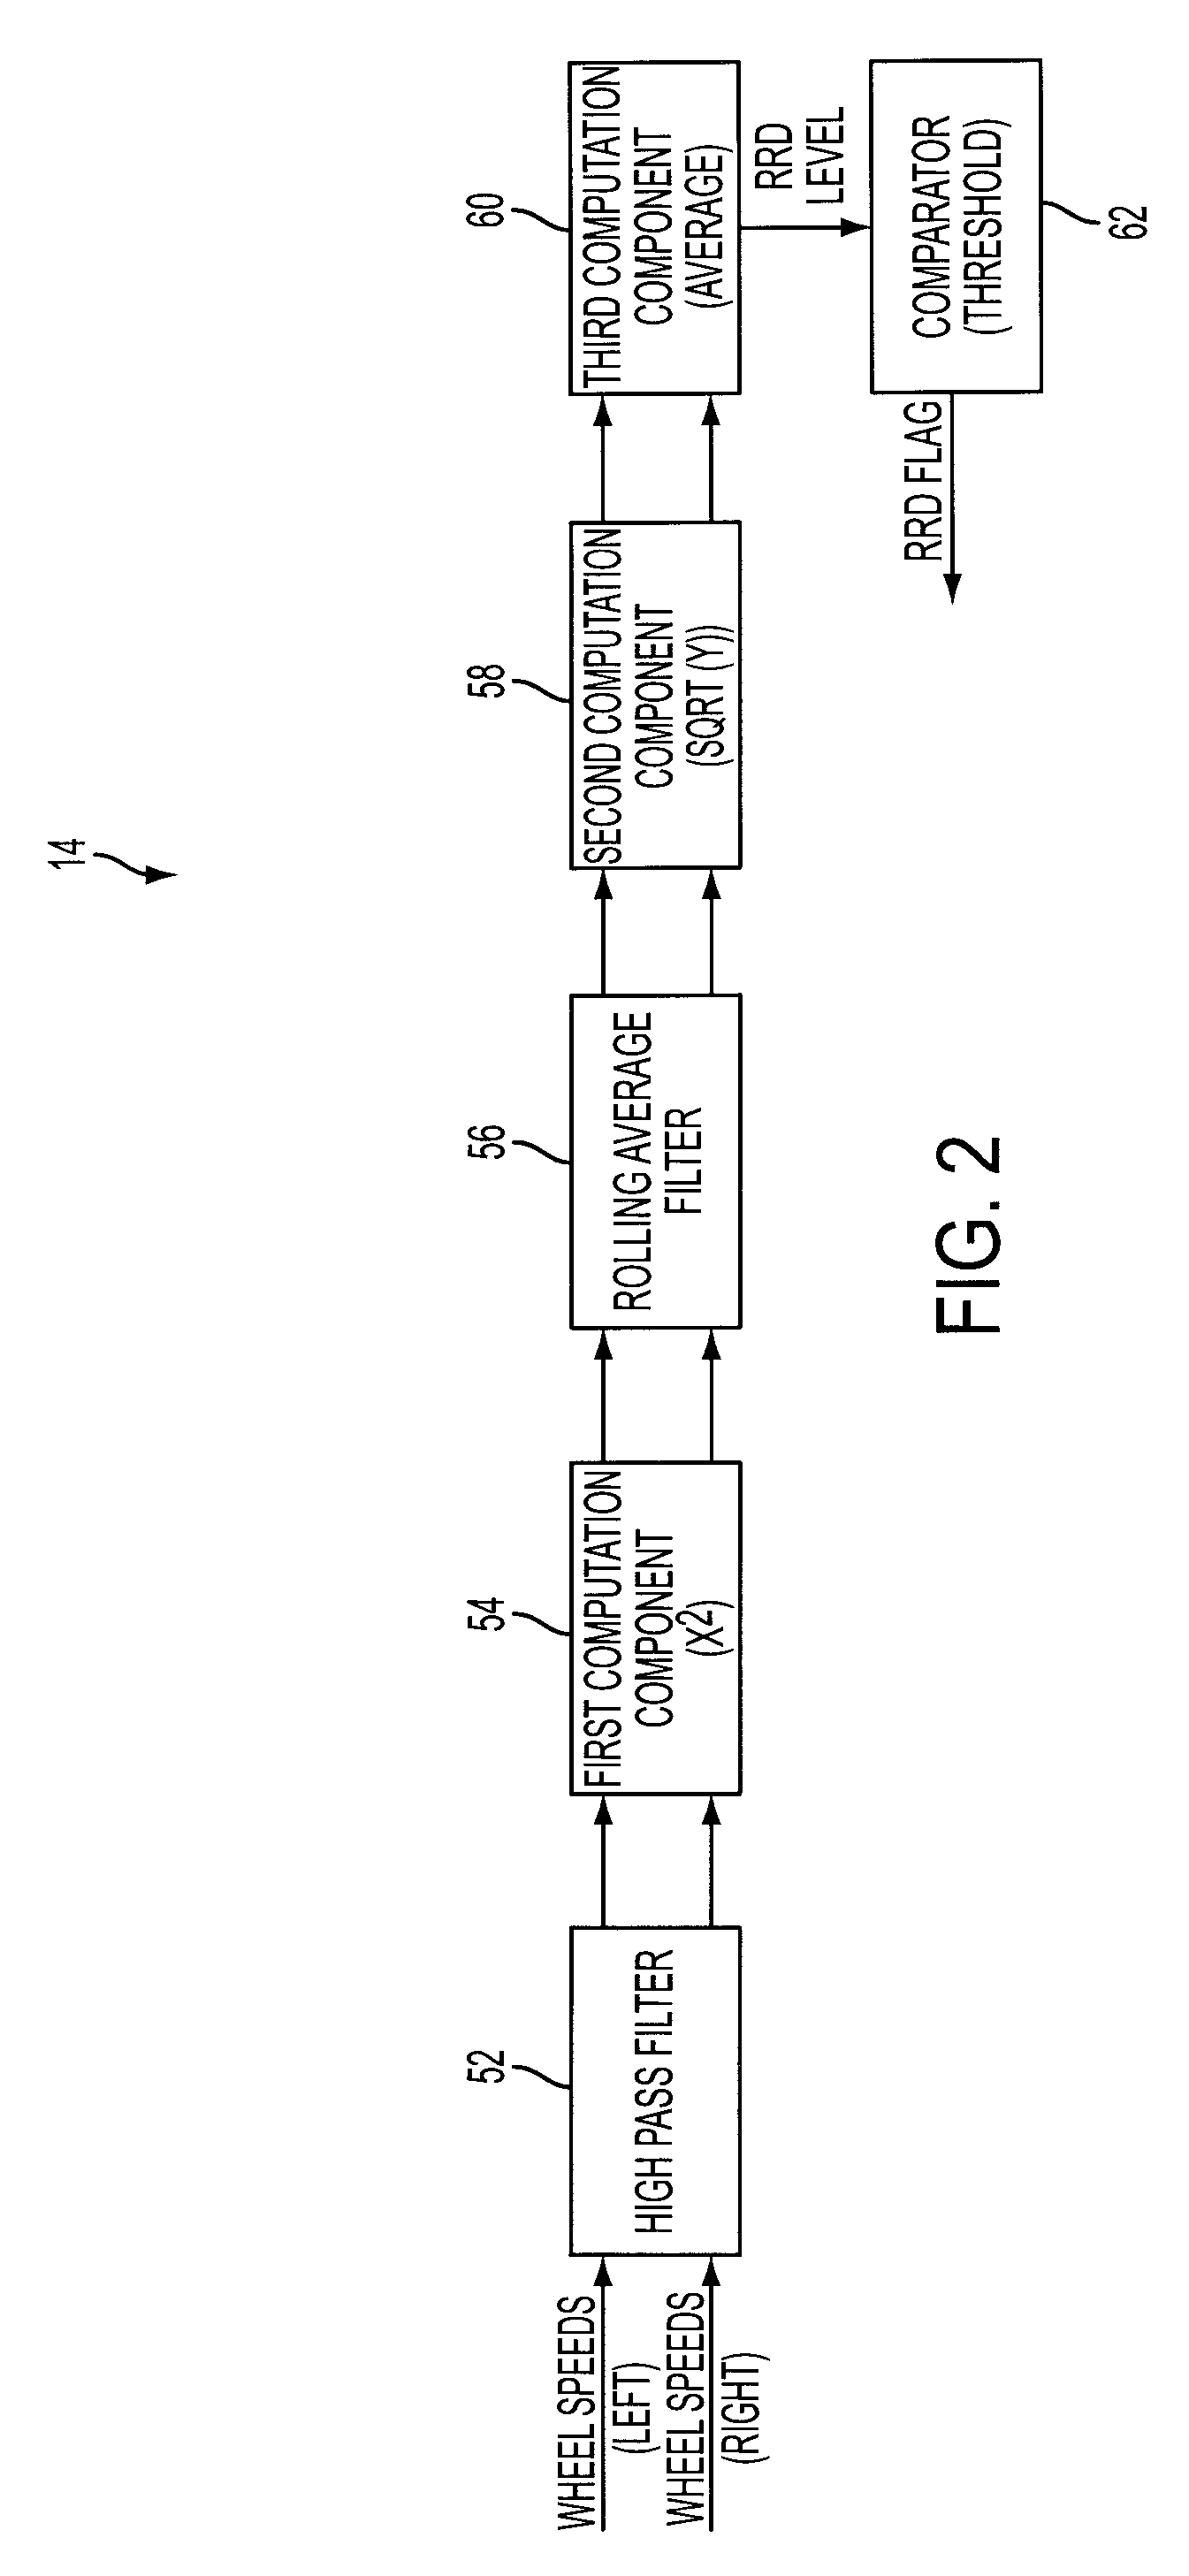 Rough Road Detection System Used in an On-Board Diagnostic System